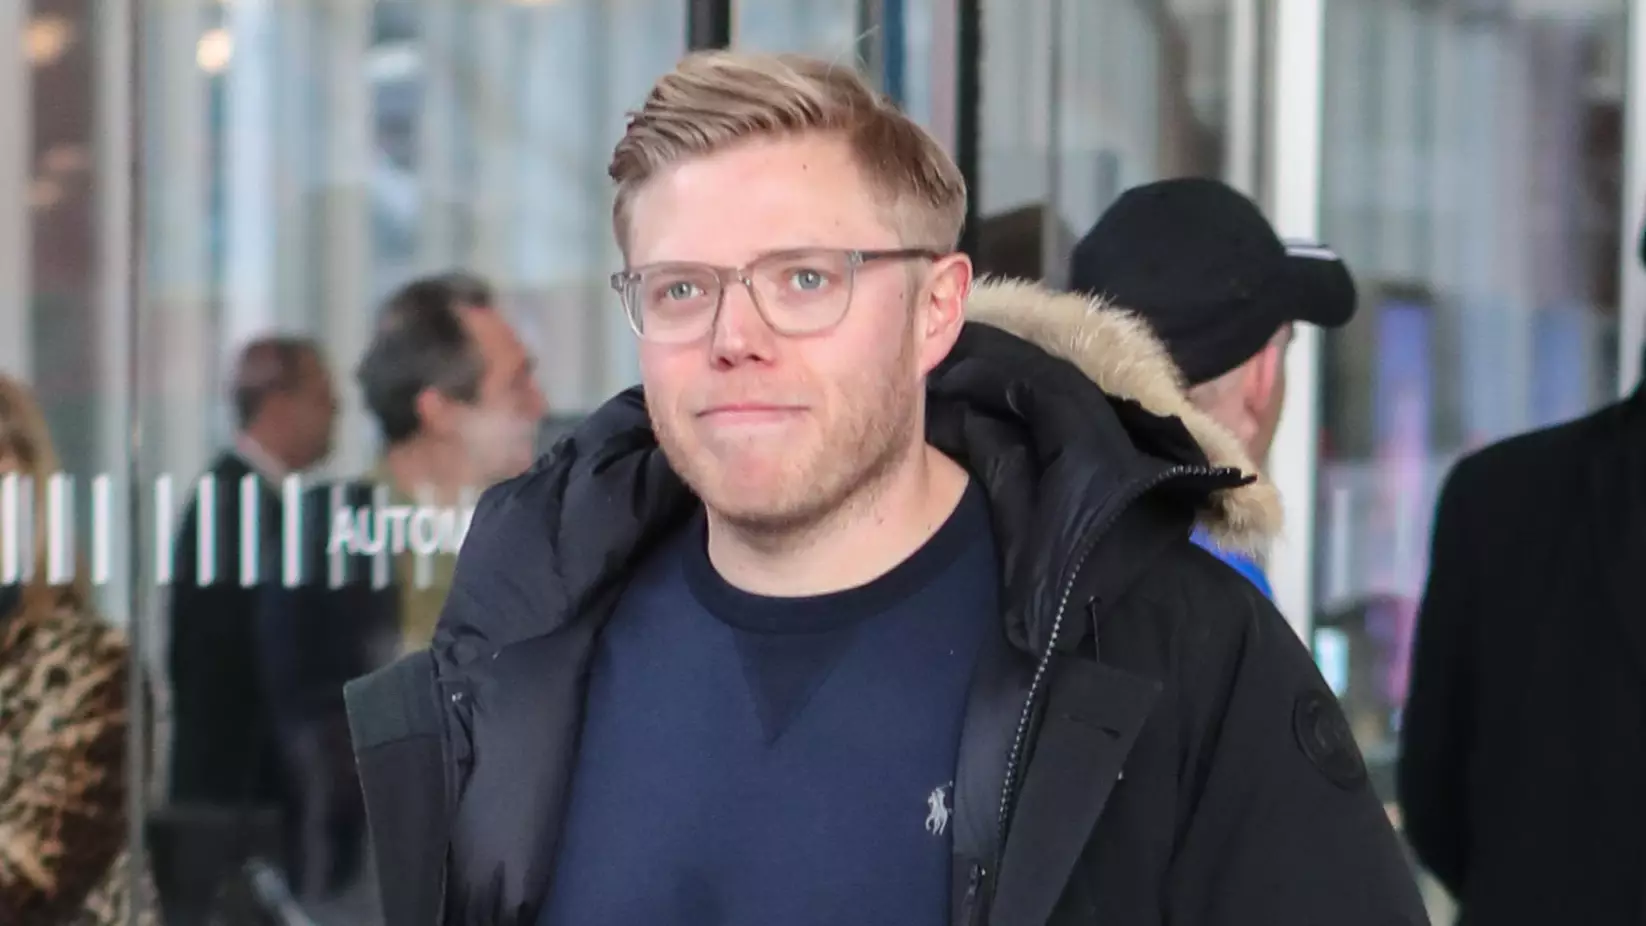 Rob Beckett Thought 'It Would Be Better If He Was Dead' During Mental Health Struggle